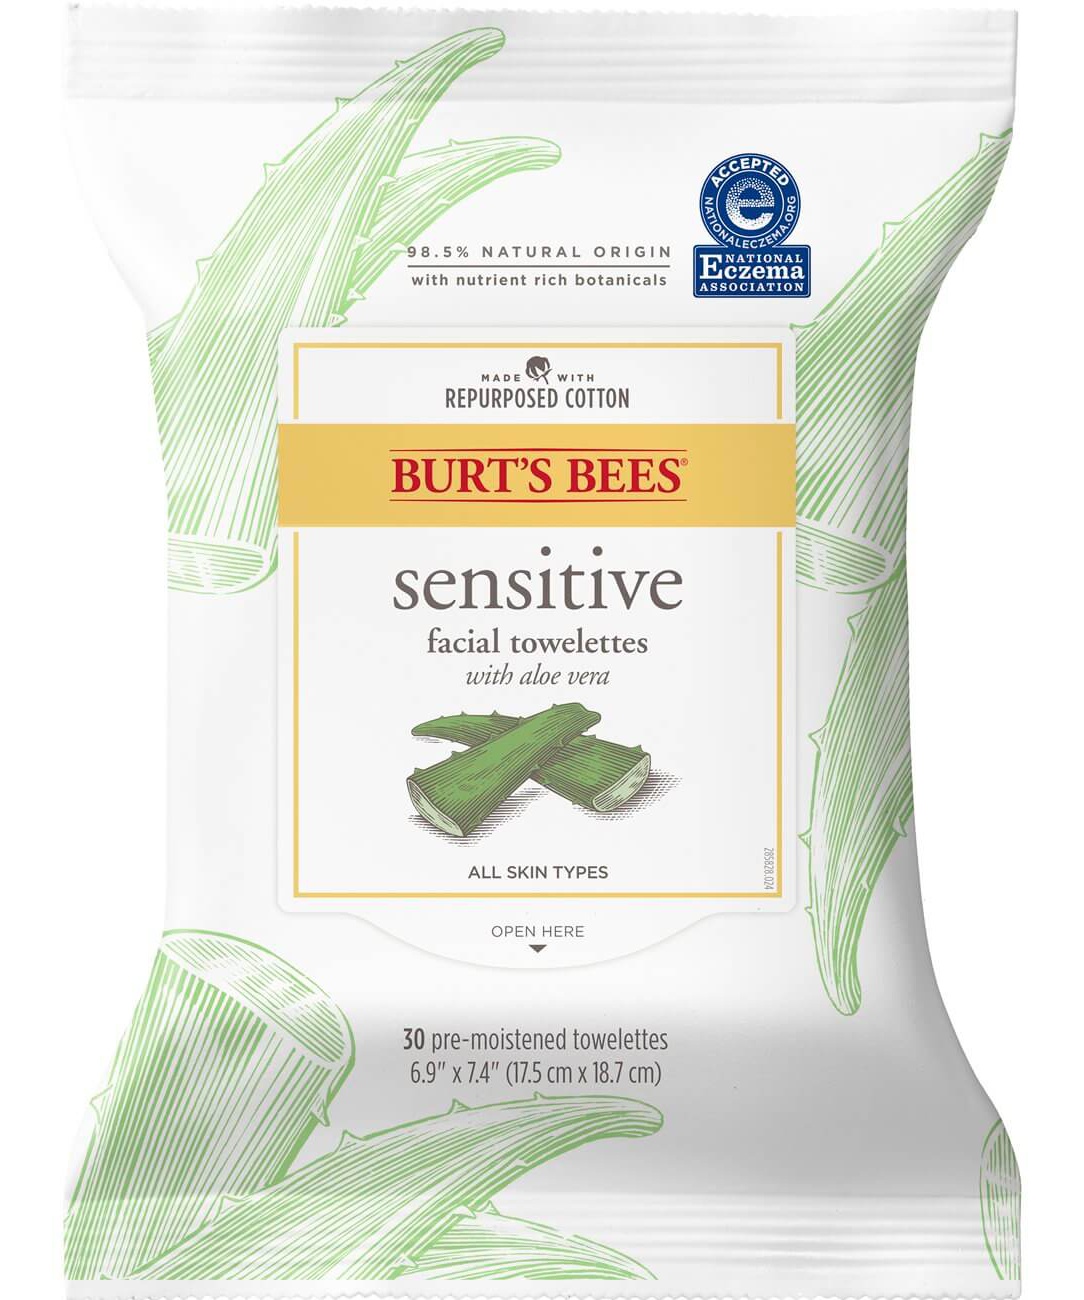 Burt's Bees Sensitive Facial Cleanser Towelettes With Aloe Vera